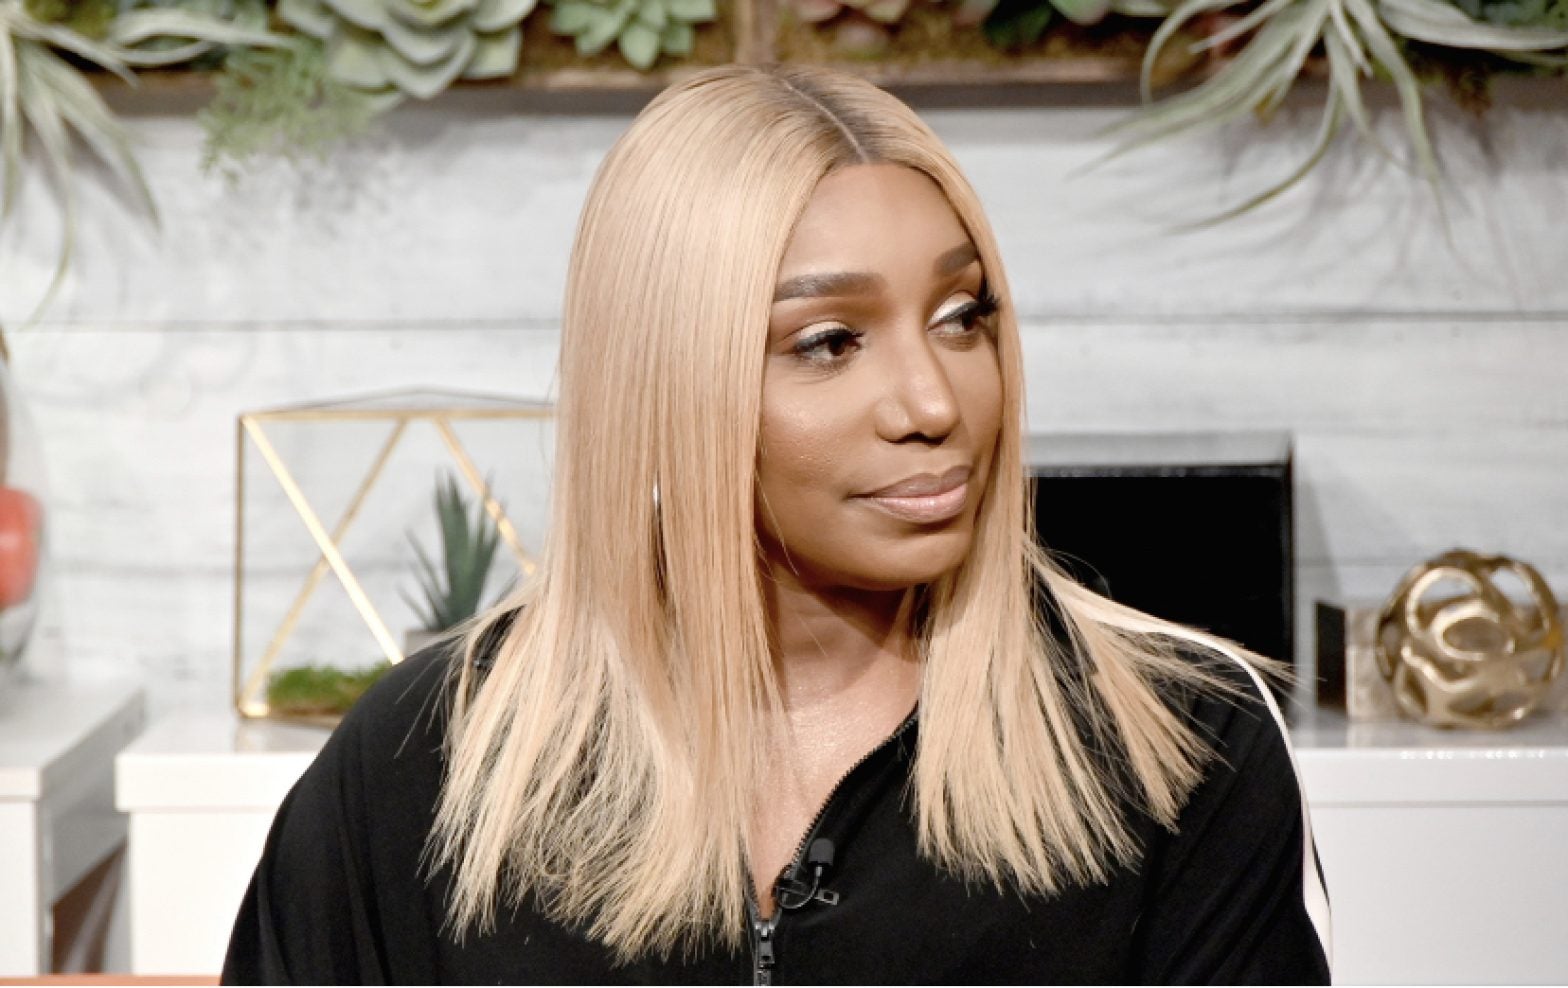 NeNe Leakes Files Lawsuit Claiming Racist Work Environment On ‘The Real Housewives Of Atlanta’